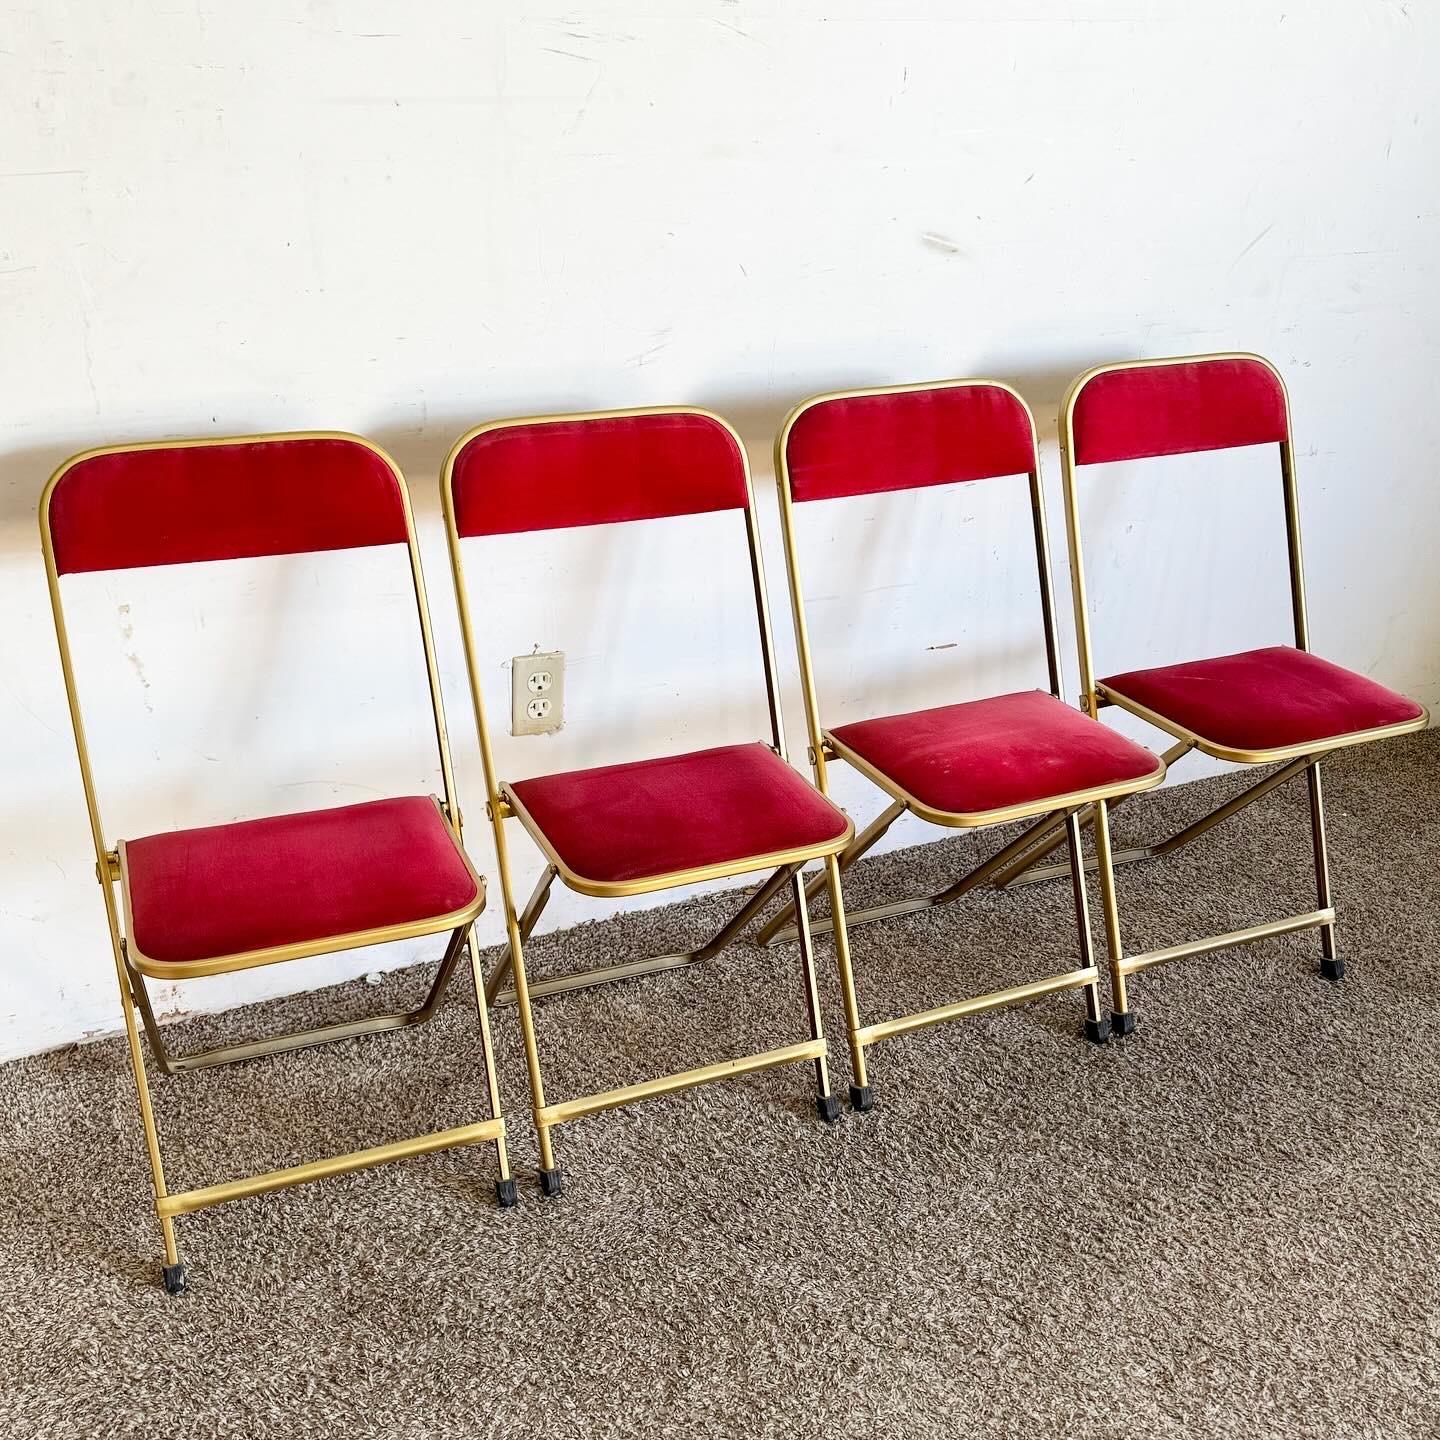 Step back into mid-century elegance with this set of four Vintage Gold and Red Folding Chairs by A. Fritz and Co. The luxurious gold frame and vibrant red seating create a beautiful contrast, blending functionality with style. These folding chairs